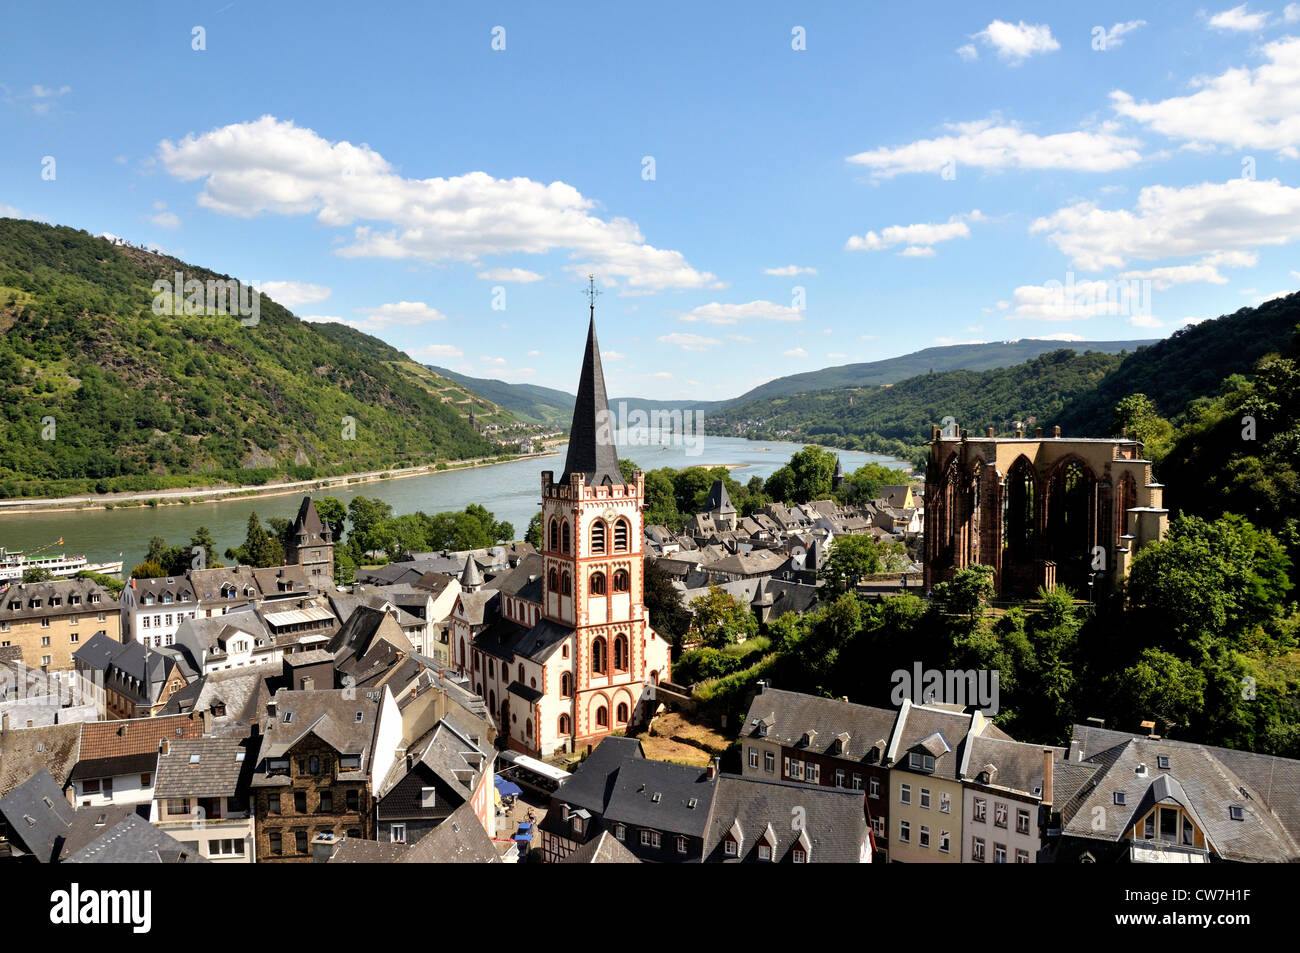 view on town with Saint Peter�s Church and ruin of Wernerkapelle, Germany, Rhineland-Palatinate, Oberes Mittelrheintal, Bacharach Stock Photo